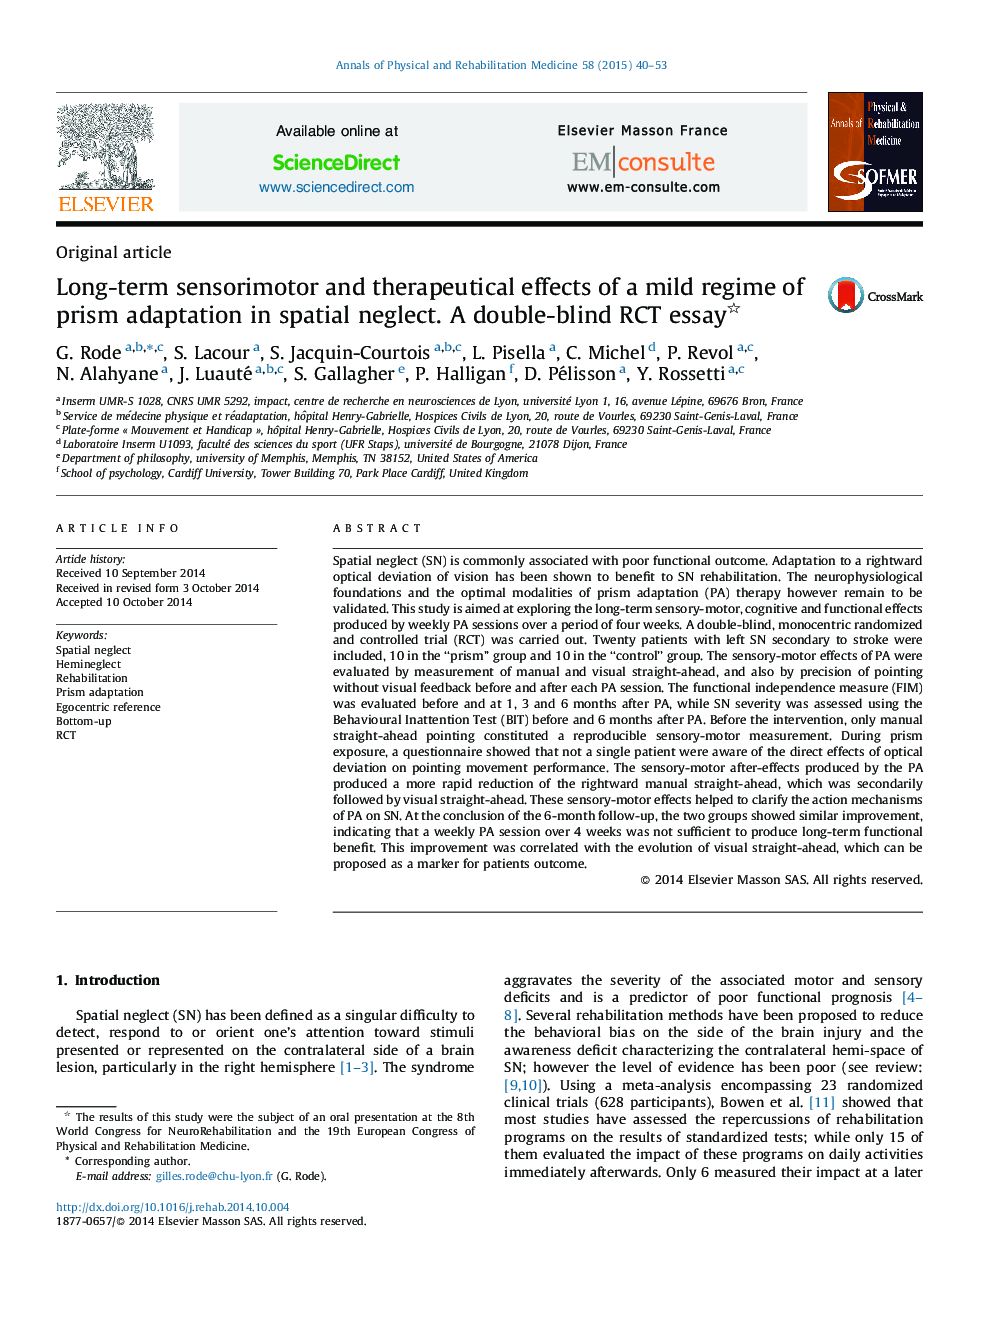 Long-term sensorimotor and therapeutical effects of a mild regime of prism adaptation in spatial neglect. A double-blind RCT essay